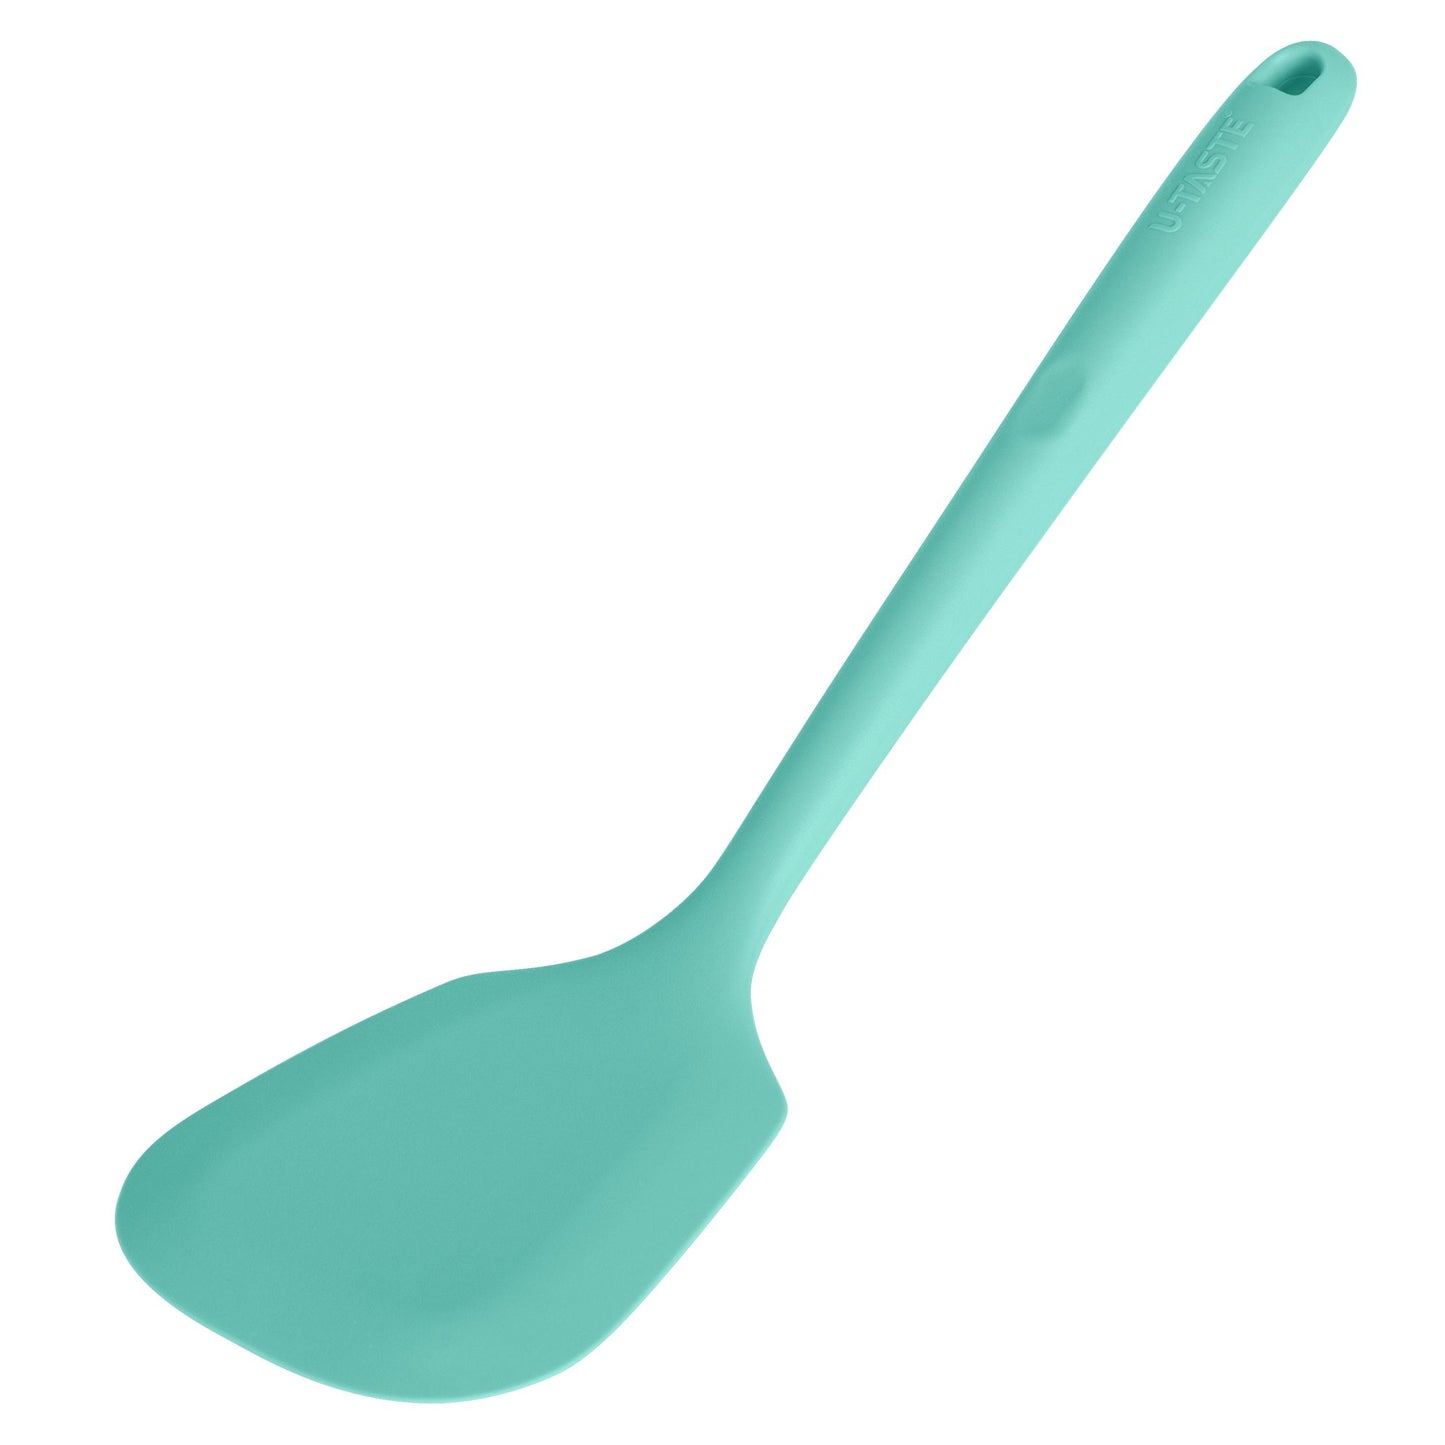 13.6" High Heat Resistant Solid Silicone Turner